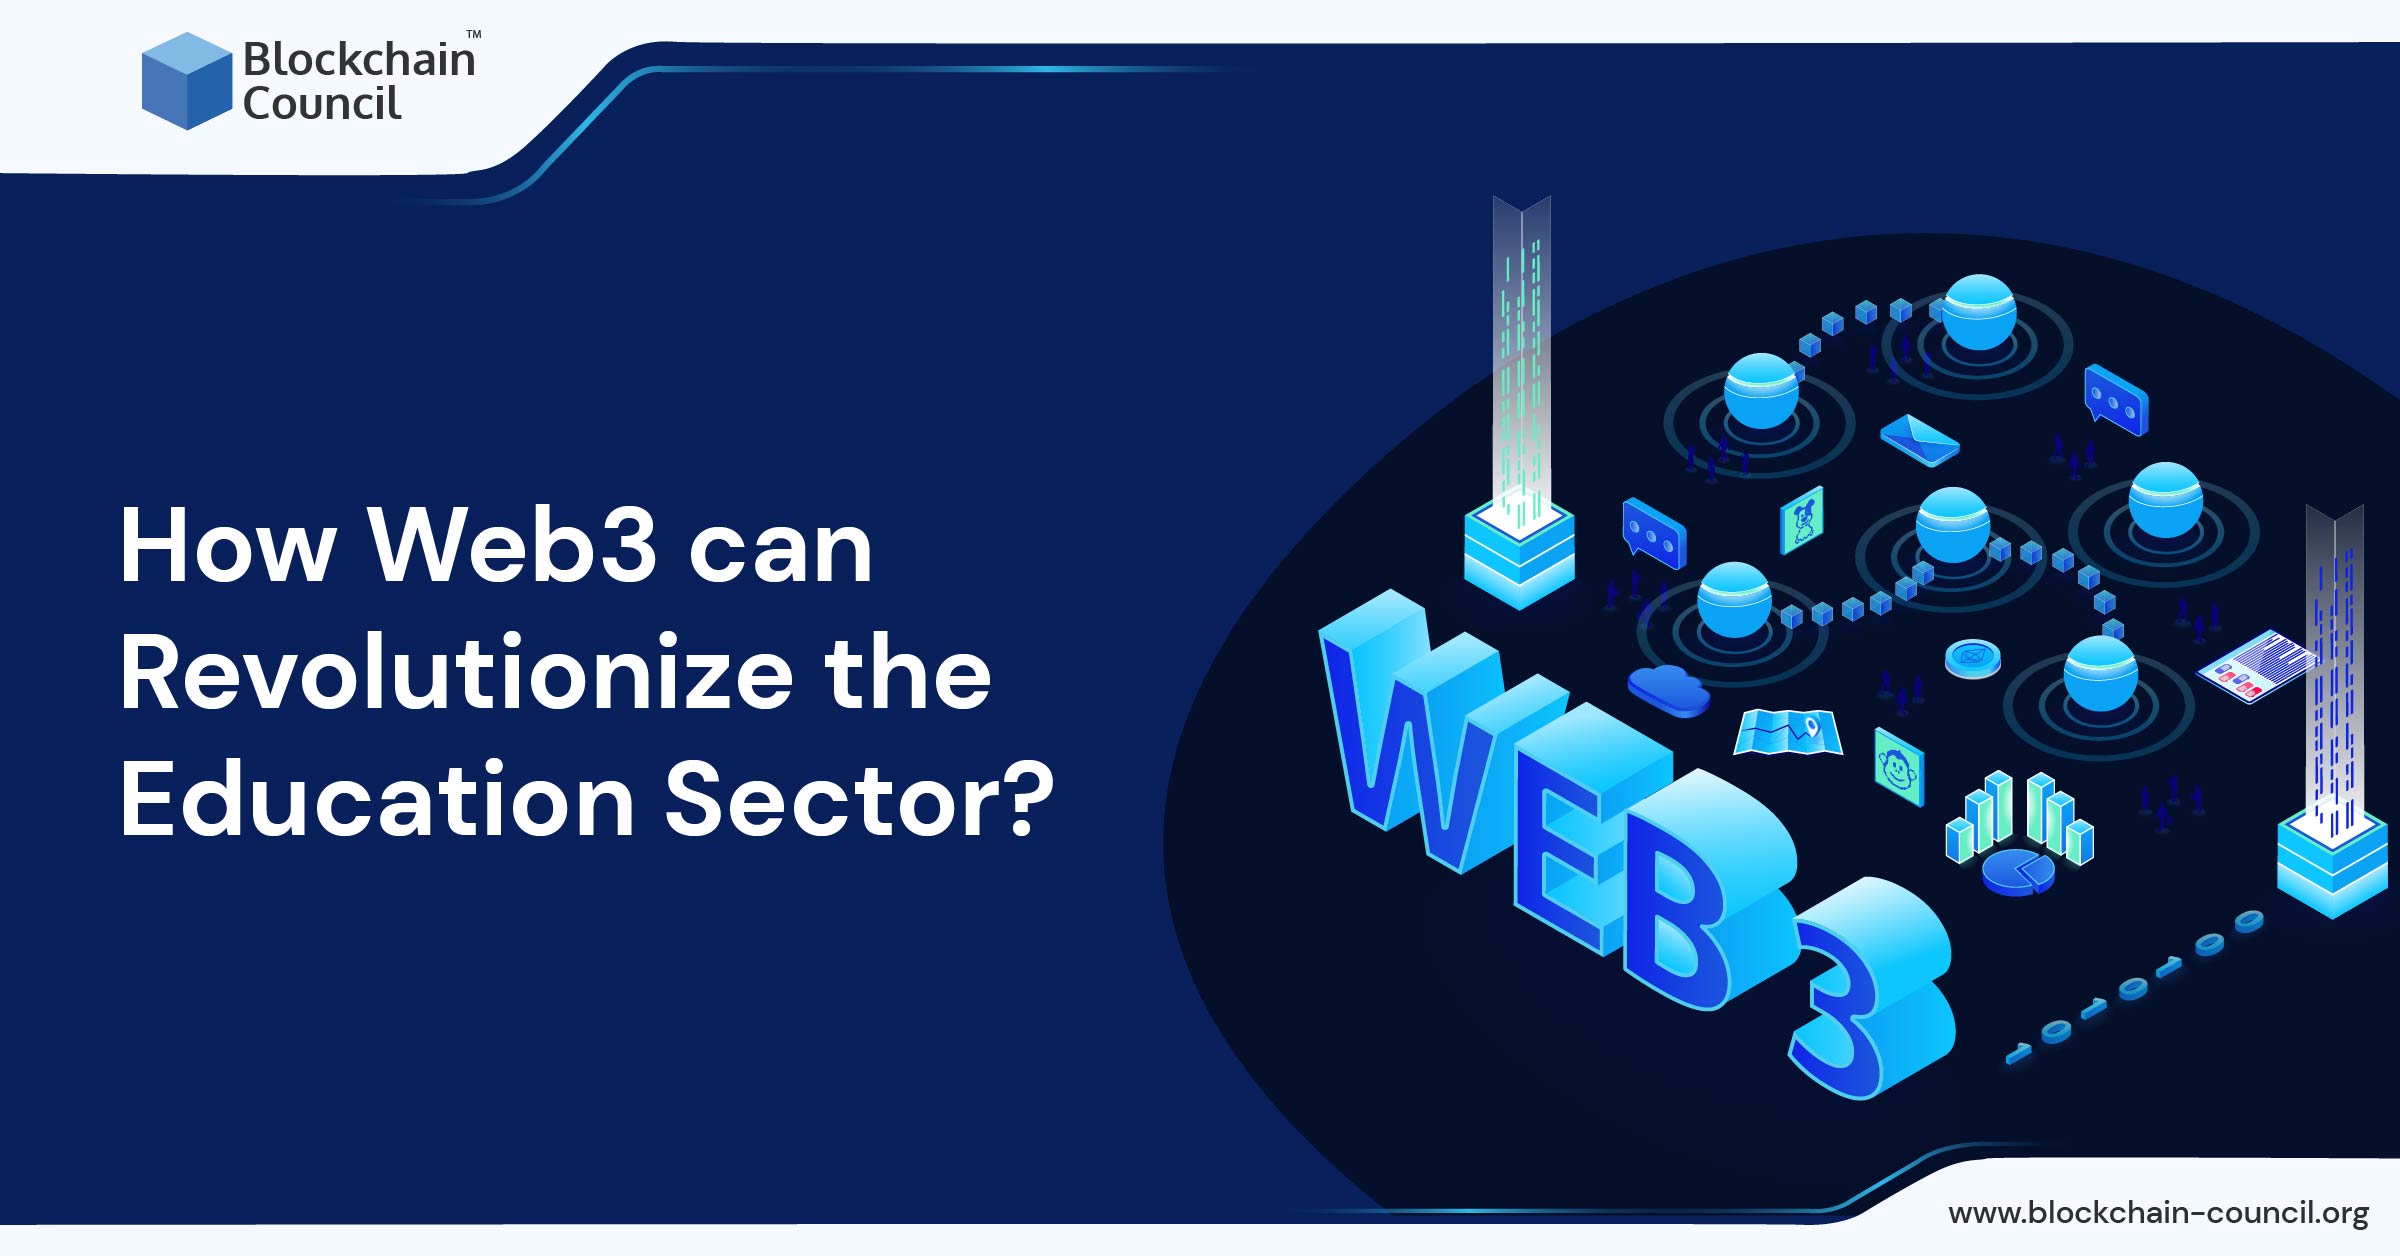 How Web3 can Revolutionize the Education Sector